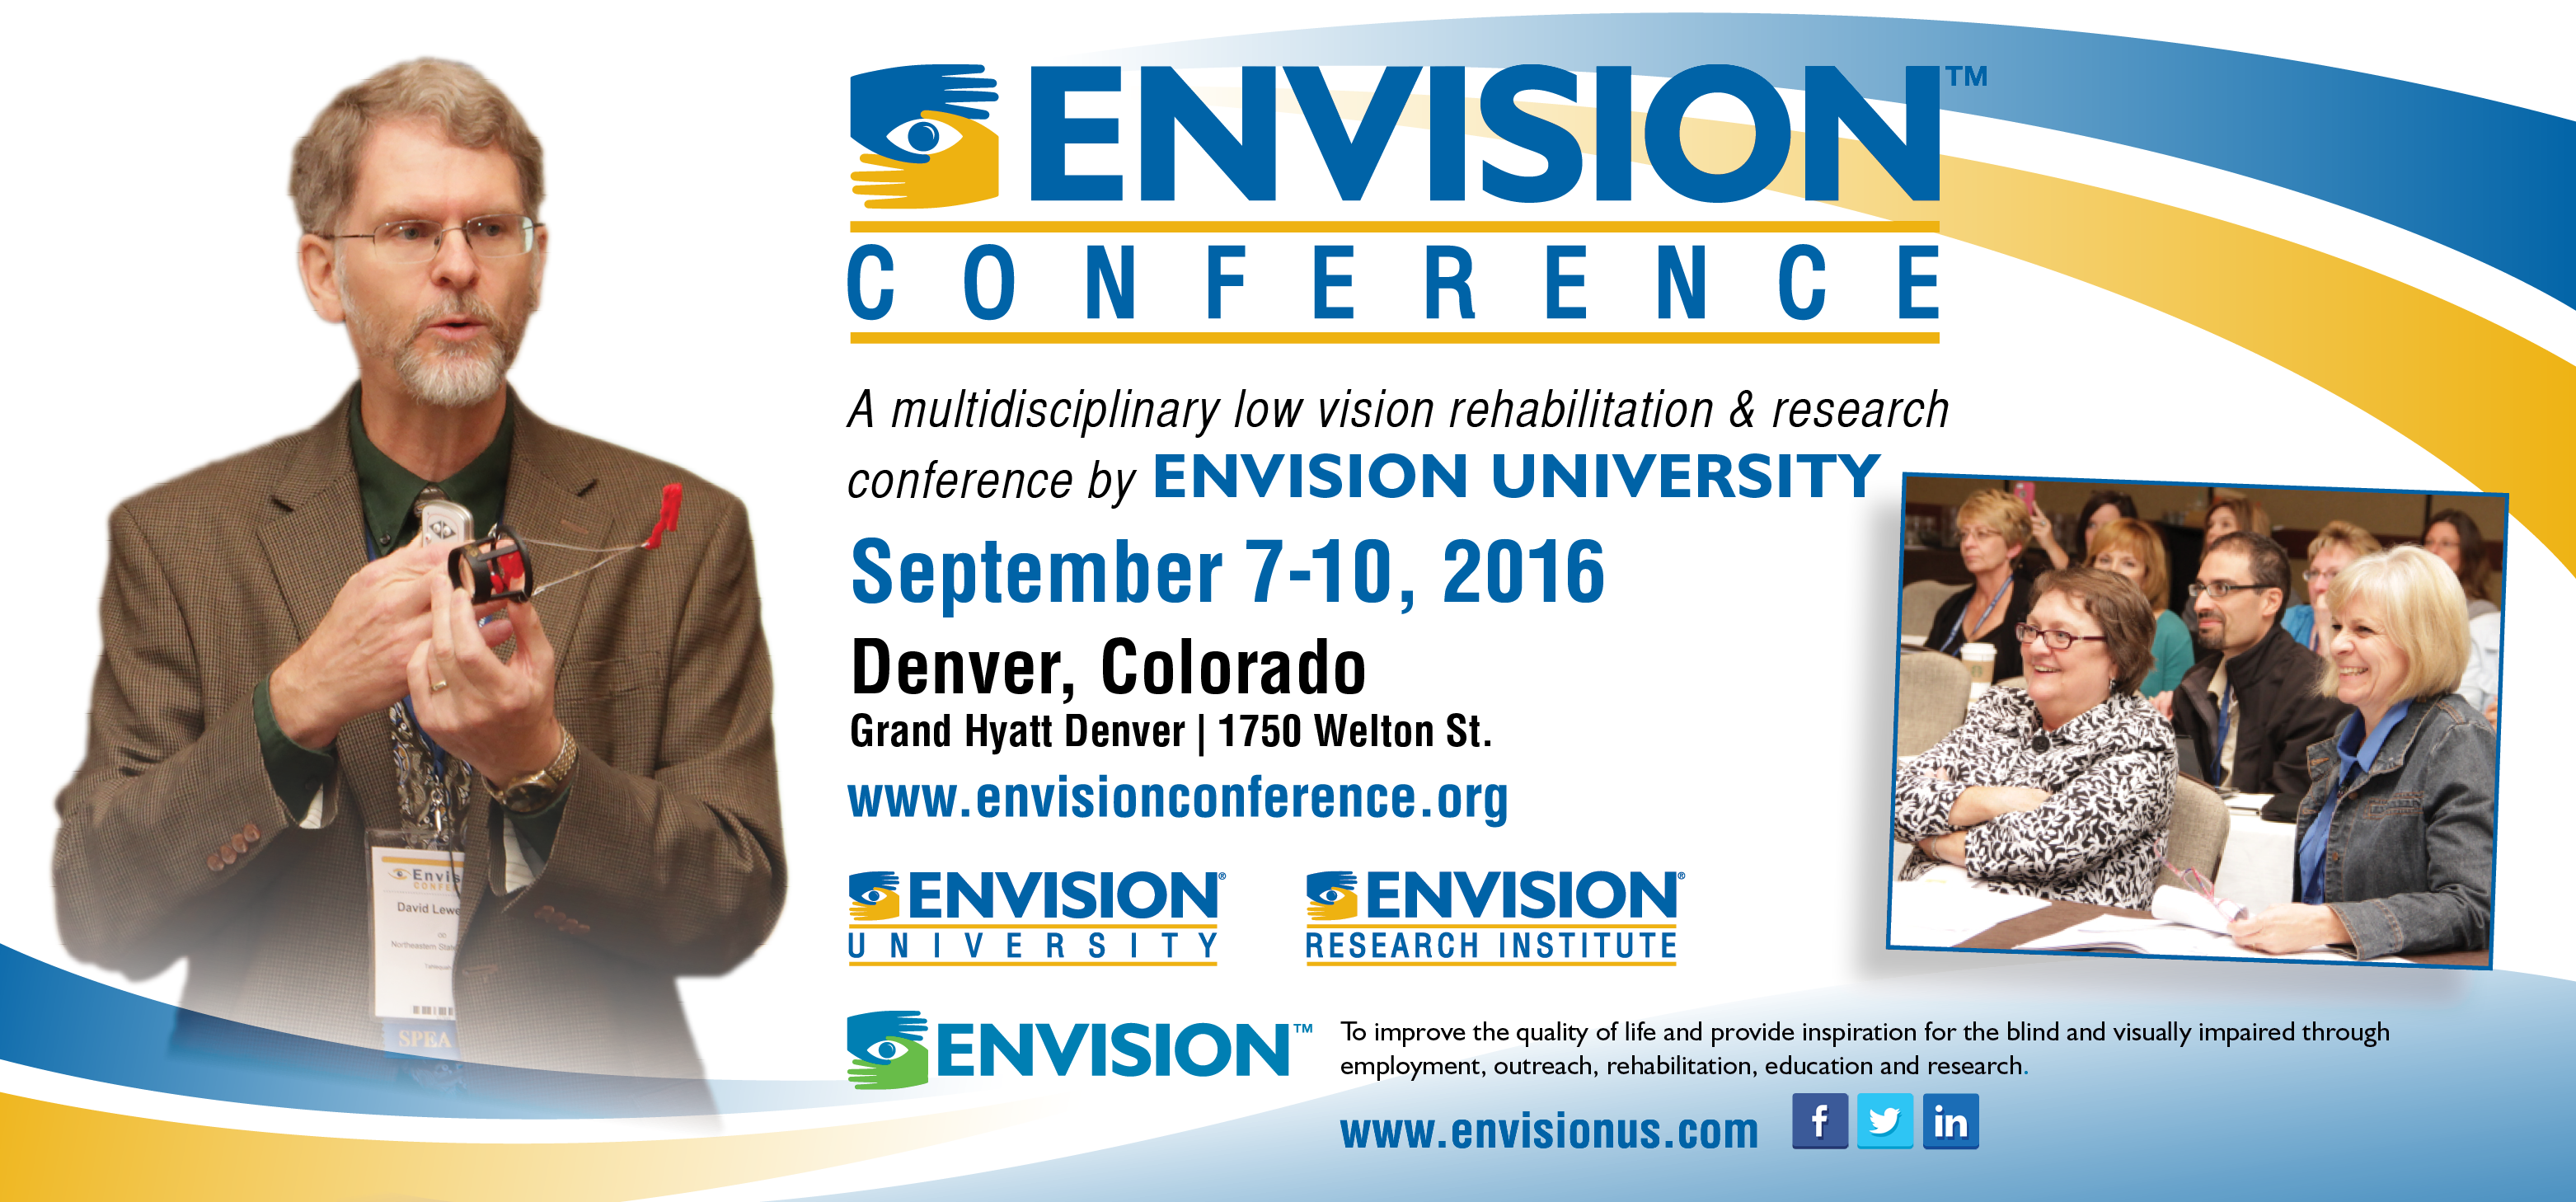 Envision Conference 2016 logo